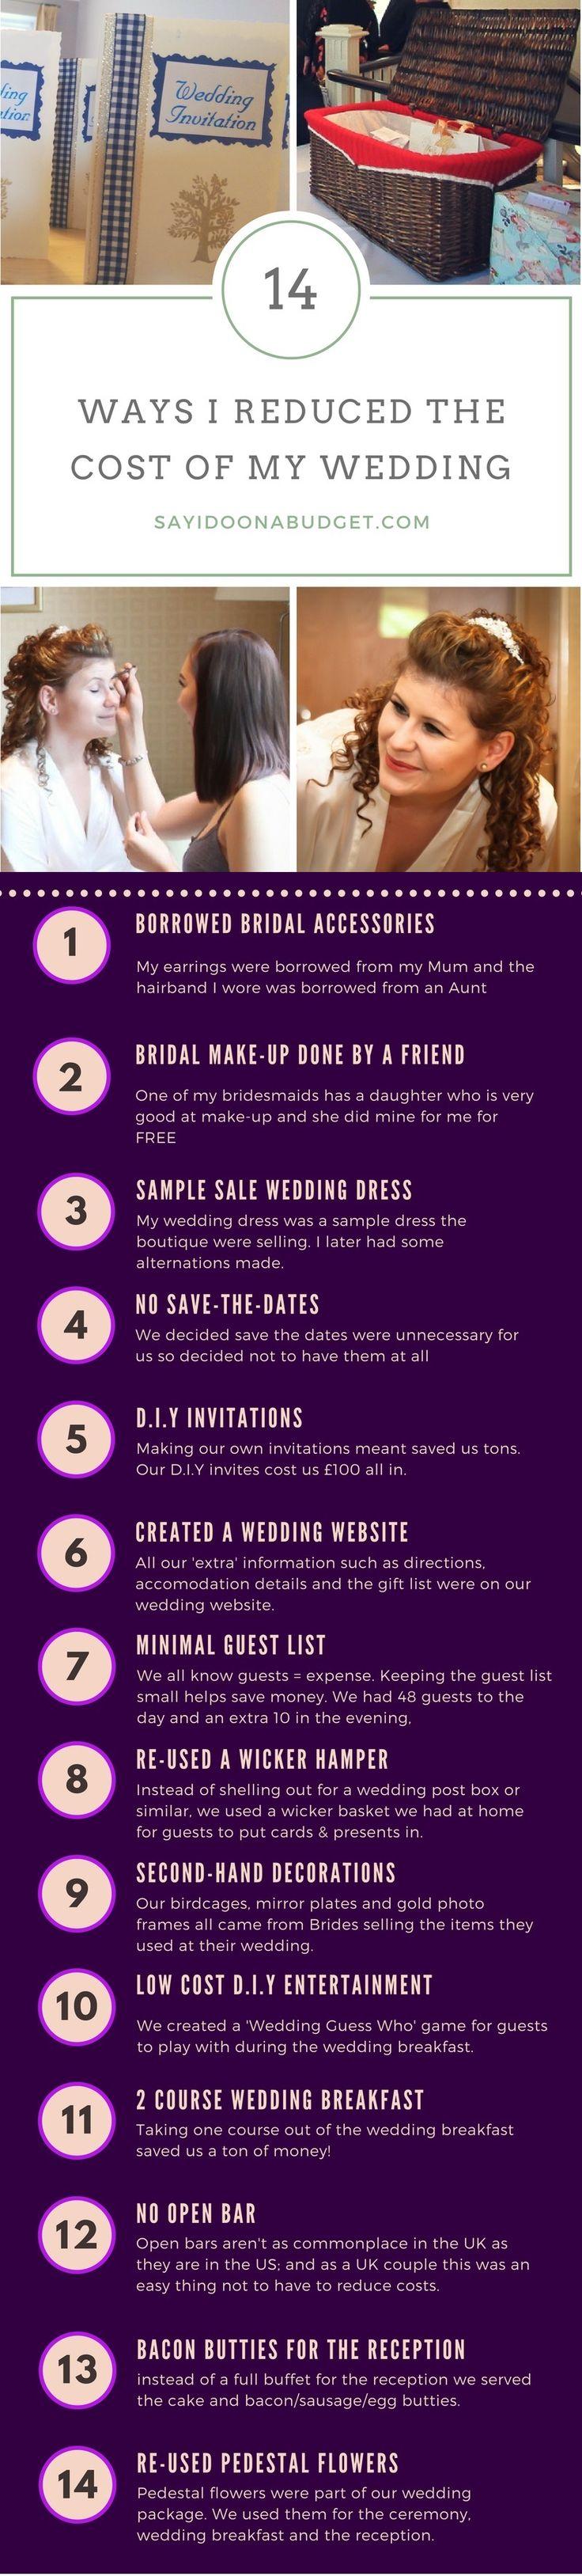 Wedding - 14 Ways To Reduce The Cost Of Your Wedding. 